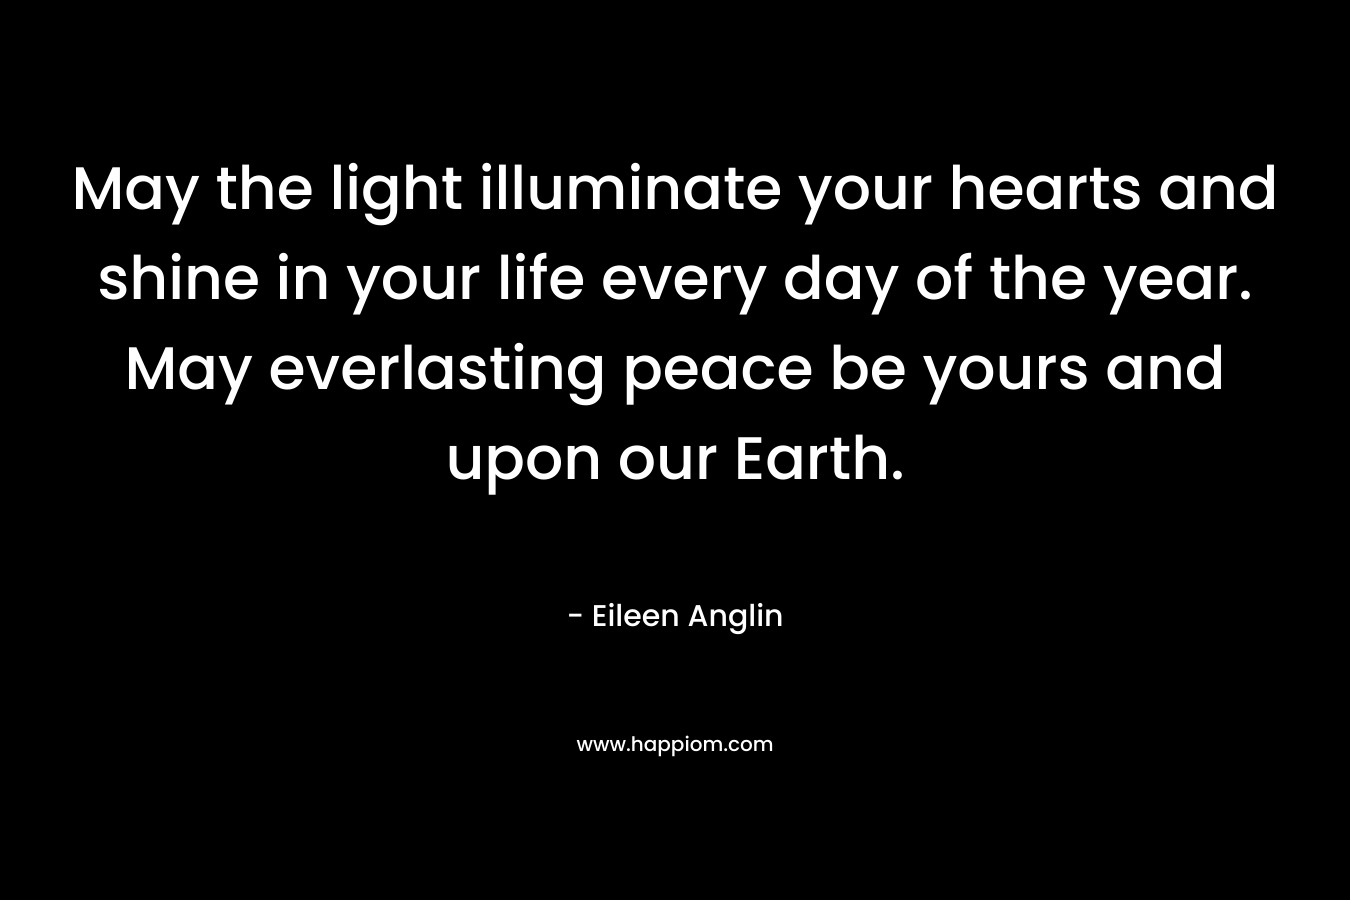 May the light illuminate your hearts and shine in your life every day of the year. May everlasting peace be yours and upon our Earth. – Eileen Anglin